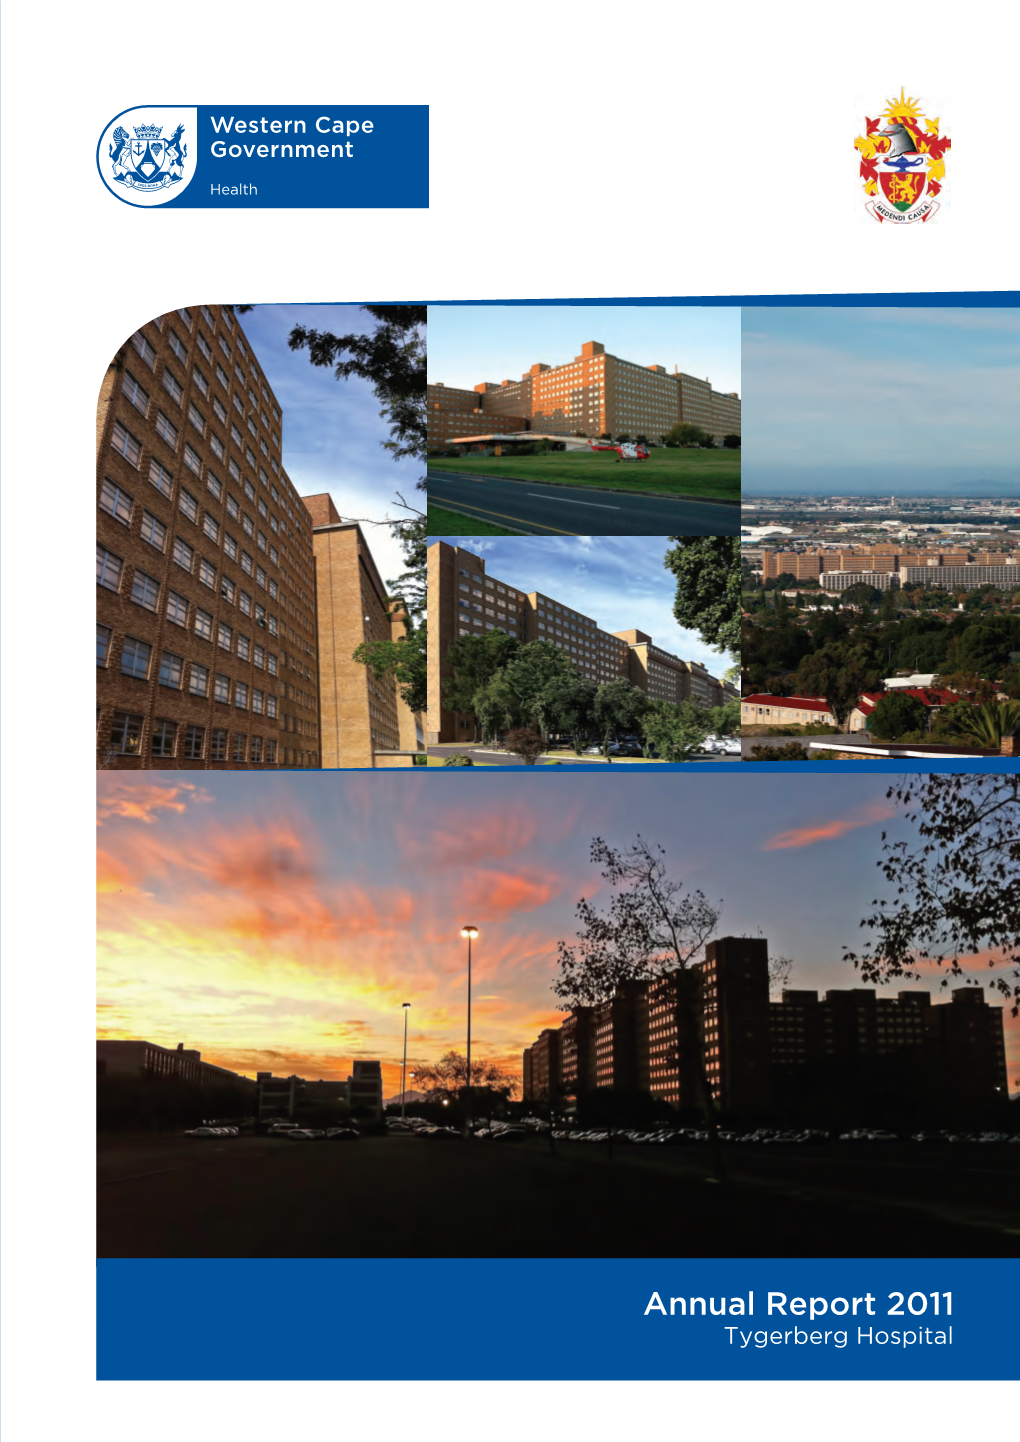 Tygerberg Hospital Annual Report 2011 Vision, Mission and Values